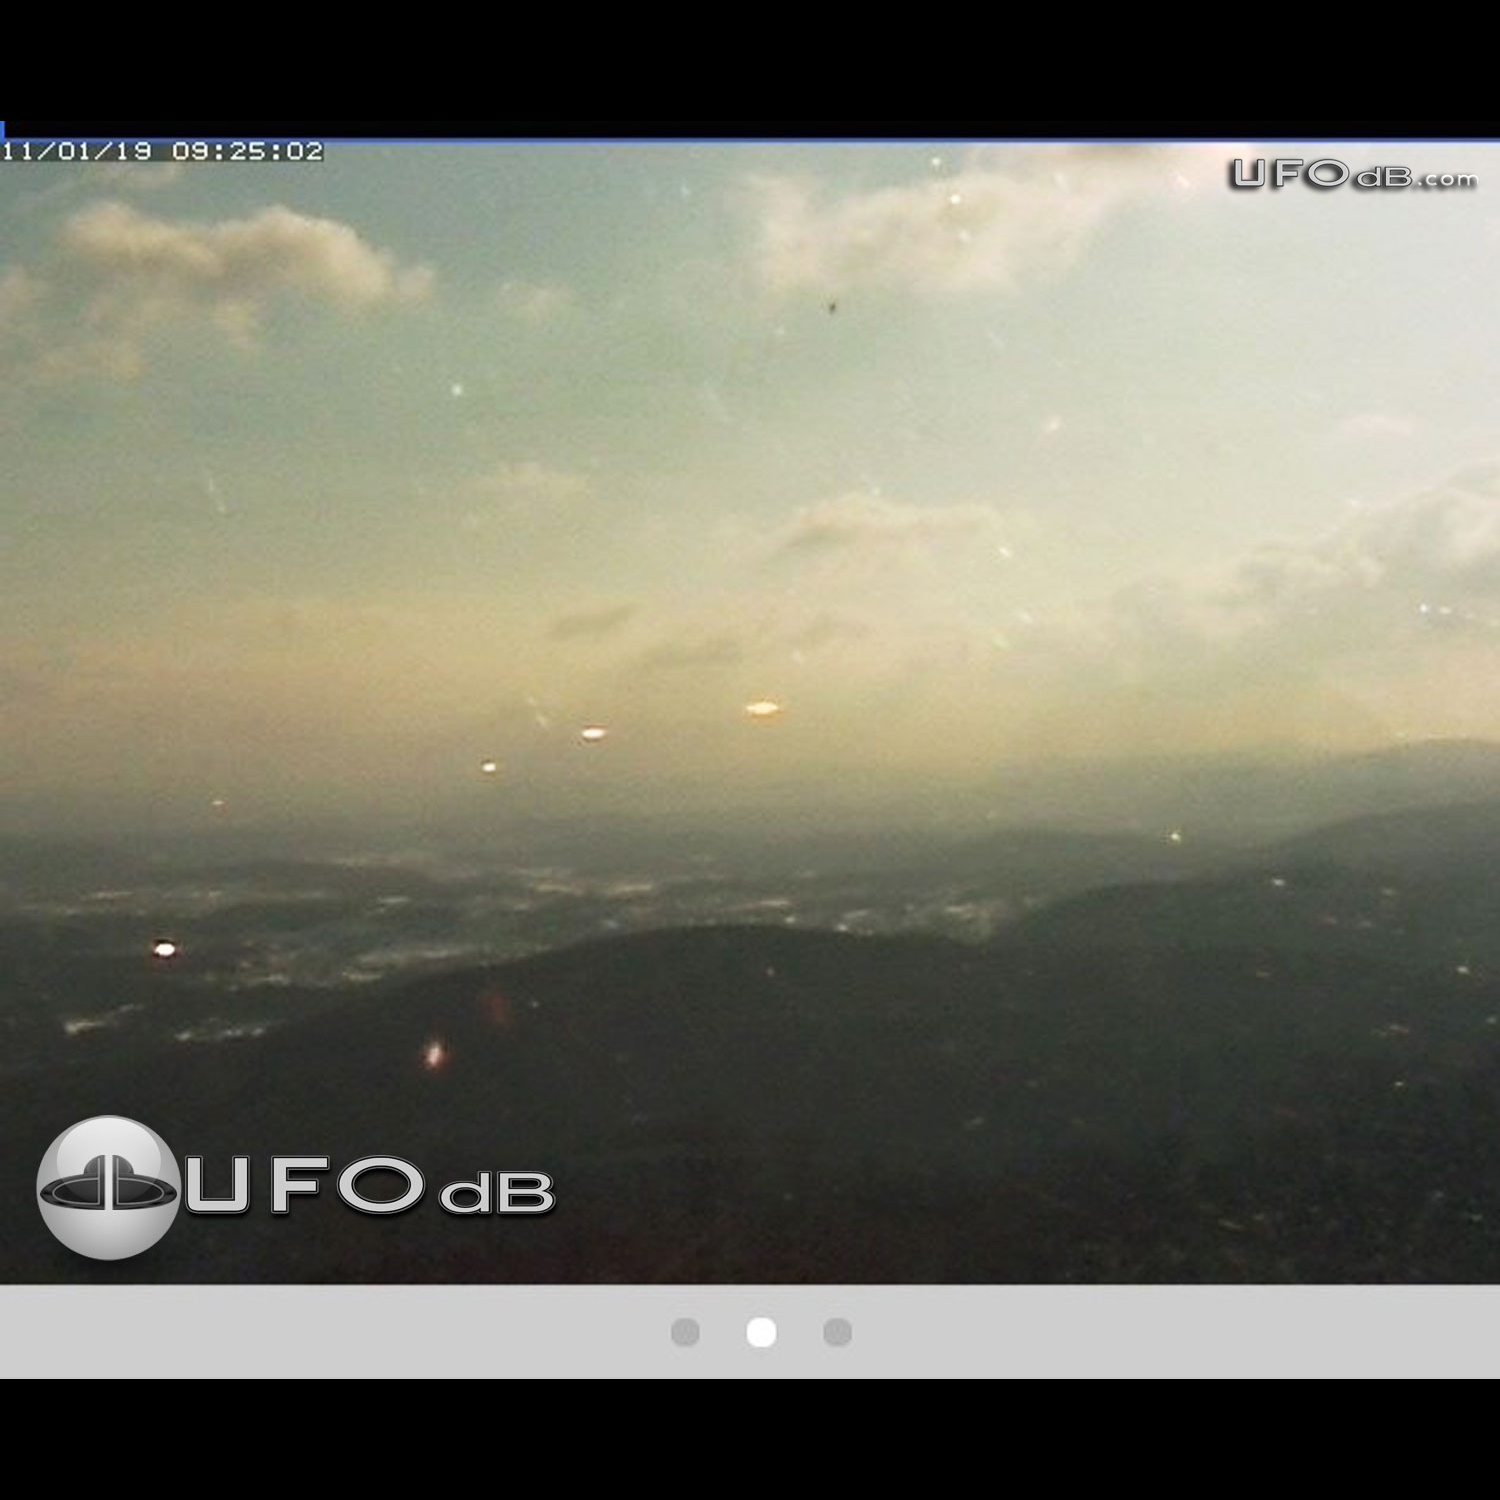 Sunrise reveals a fleet of cloaked UFOs in Chiba, Japan | January 2011 UFO Picture #244-1